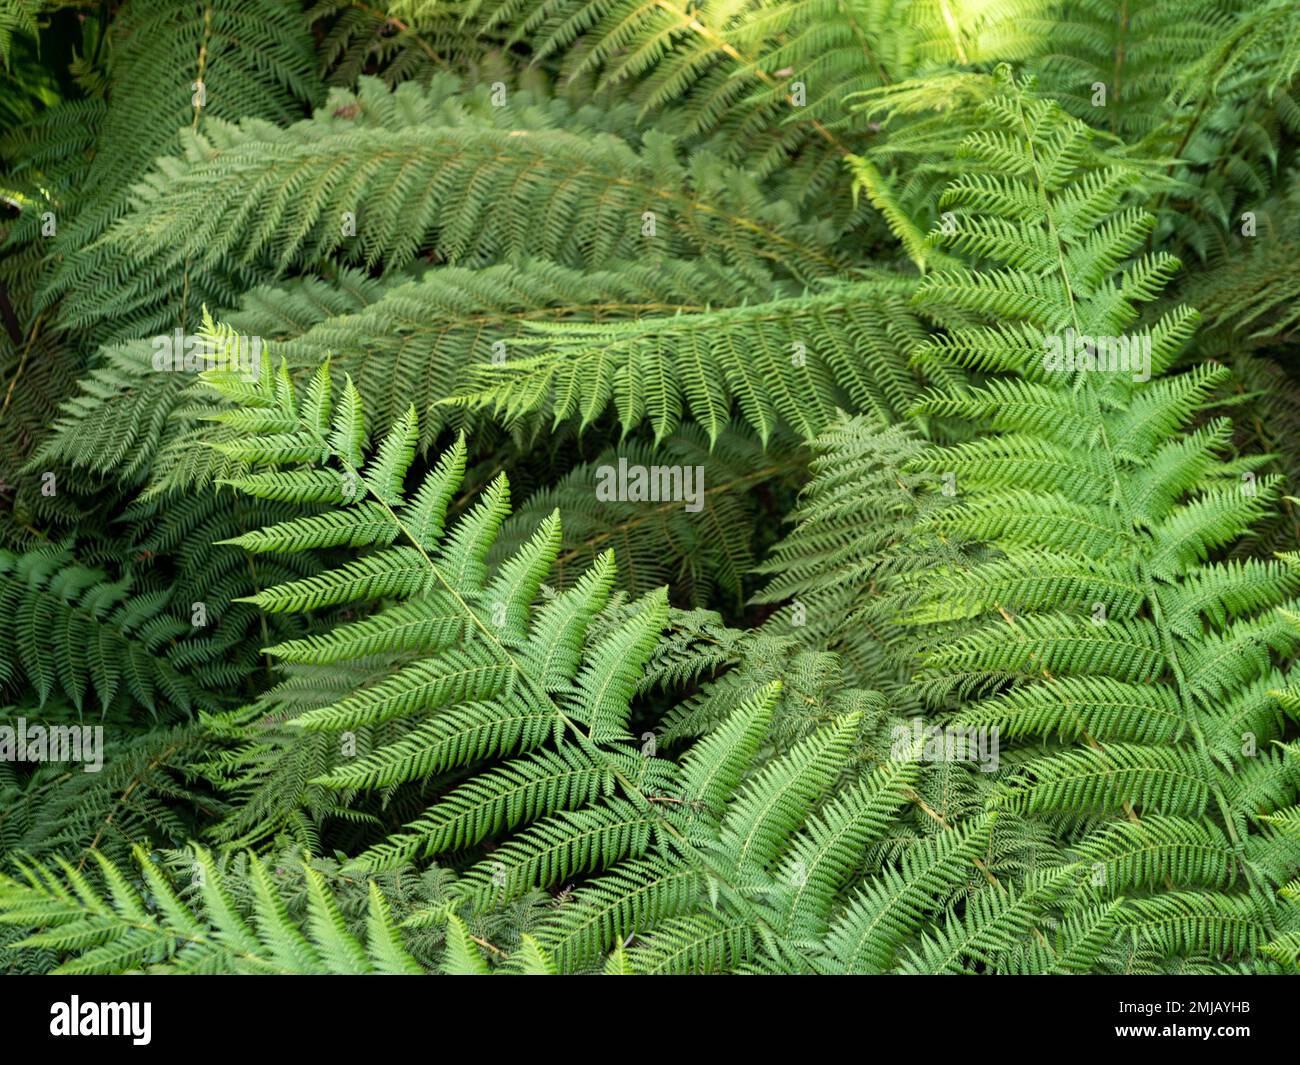 Beautiful green fern leaves, many fronds, full frame green, natural patterns Stock Photo